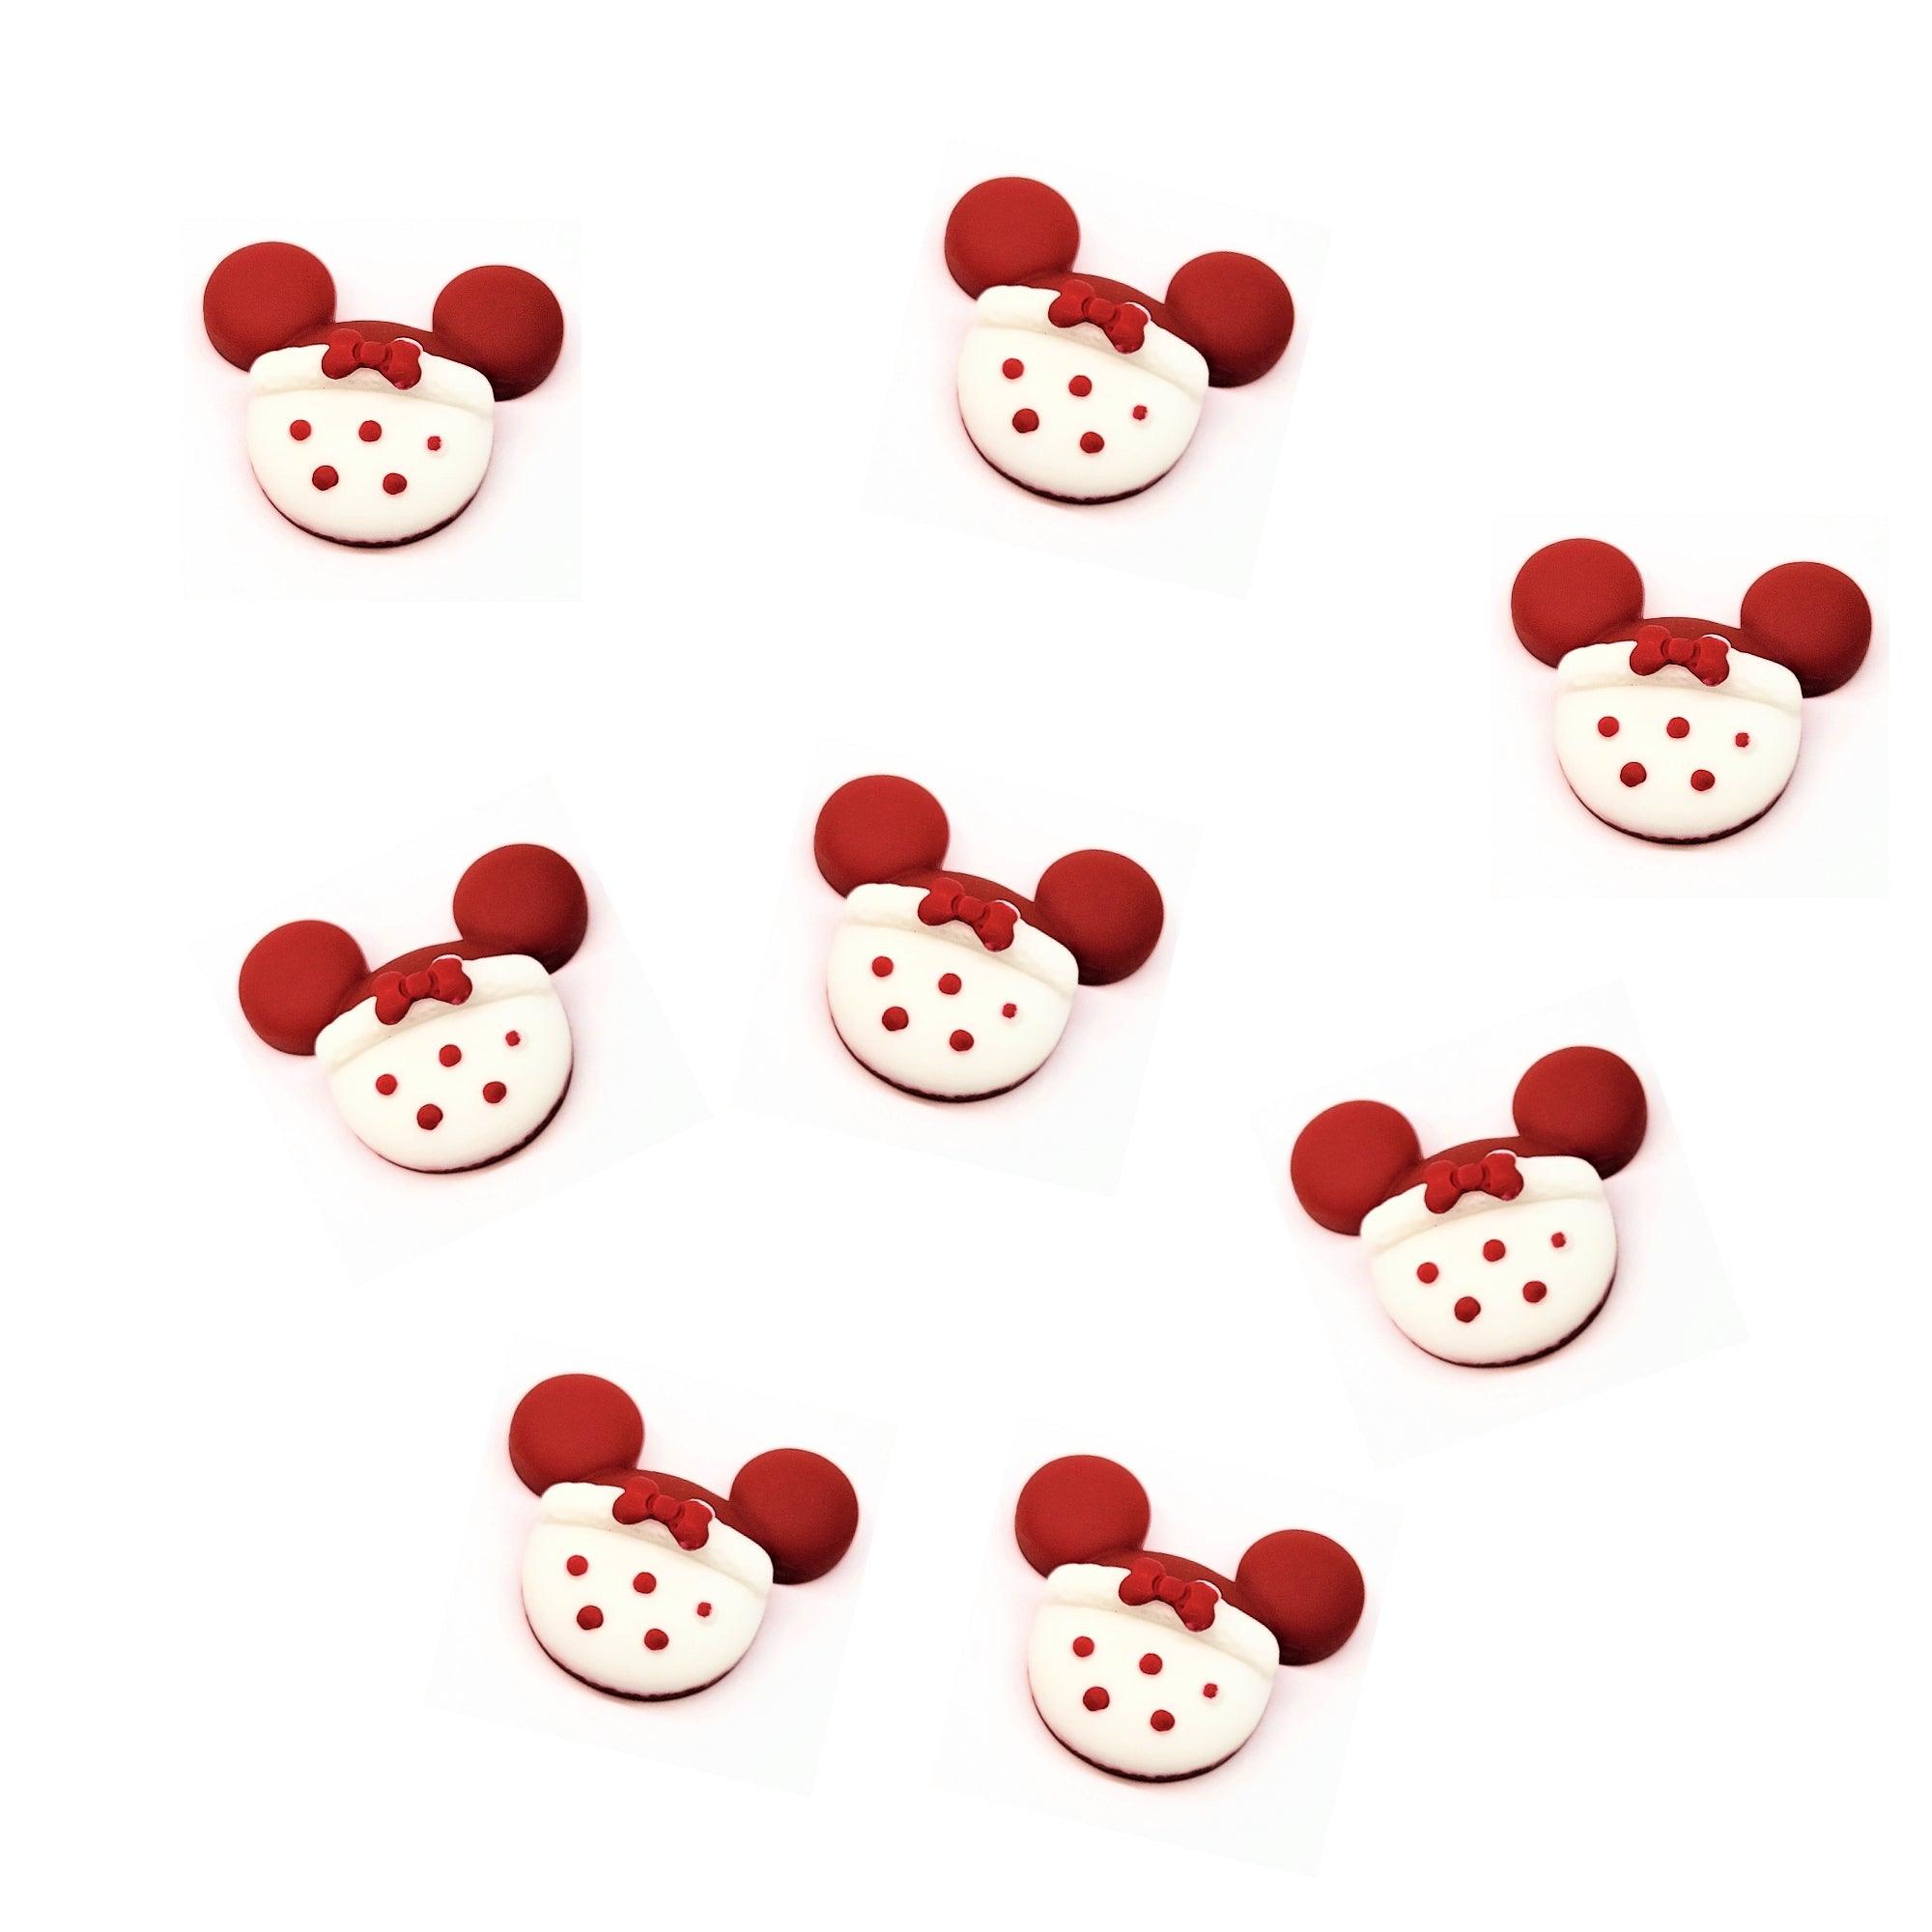 Disneyana Collection Christmas Cookie Mouse Ears Flatback Scrapbook Buttons by SSC Designs - 8 Pieces - Scrapbook Supply Companies